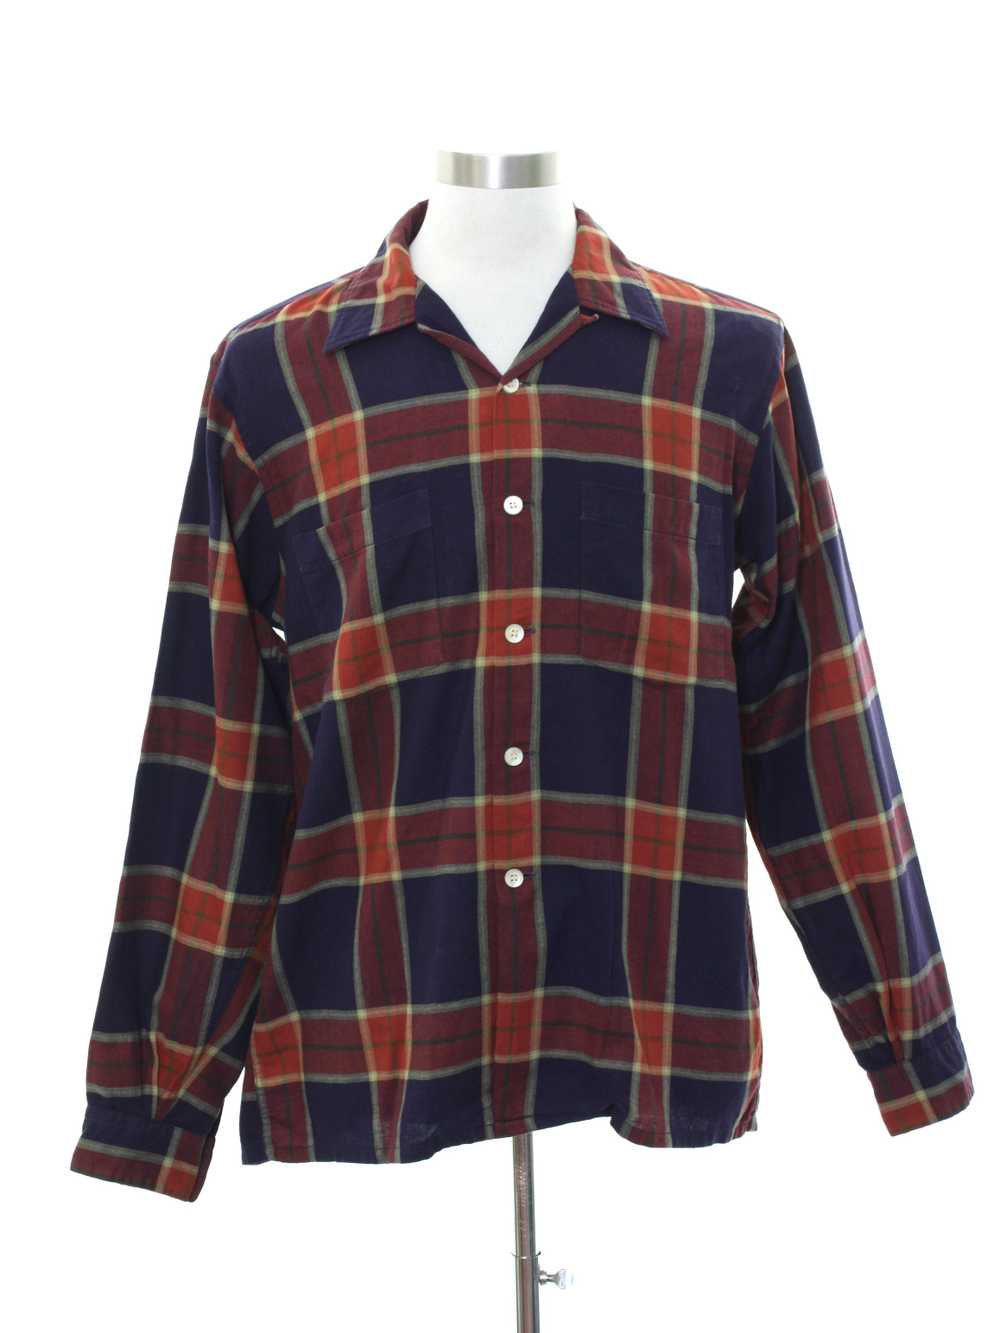 1980's Mansure and Prettyman Mens Flannel Shirt - image 1